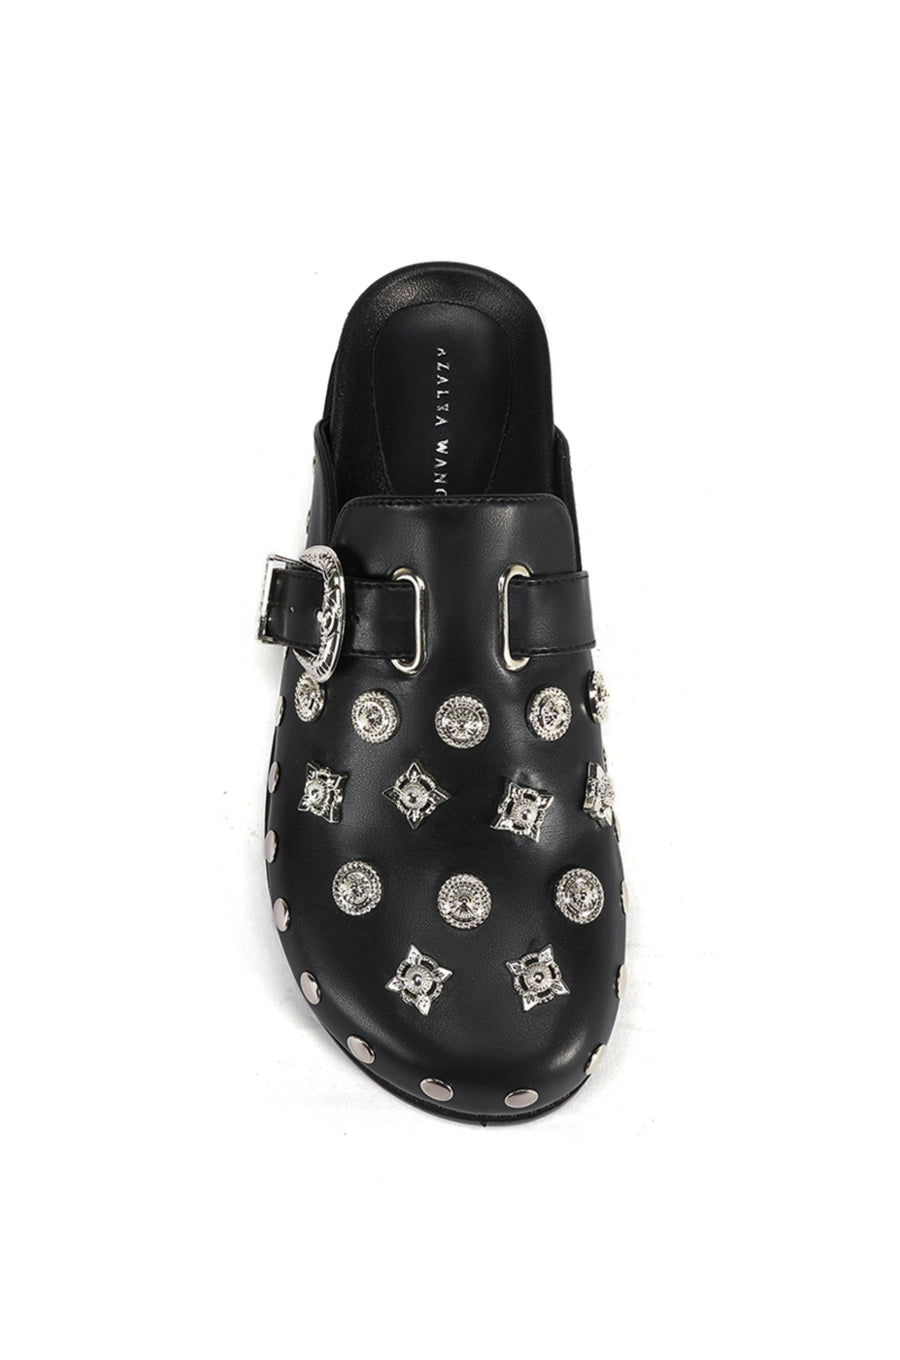 top view of black slip on western mule with silver studded accents and a western belt buckle detail